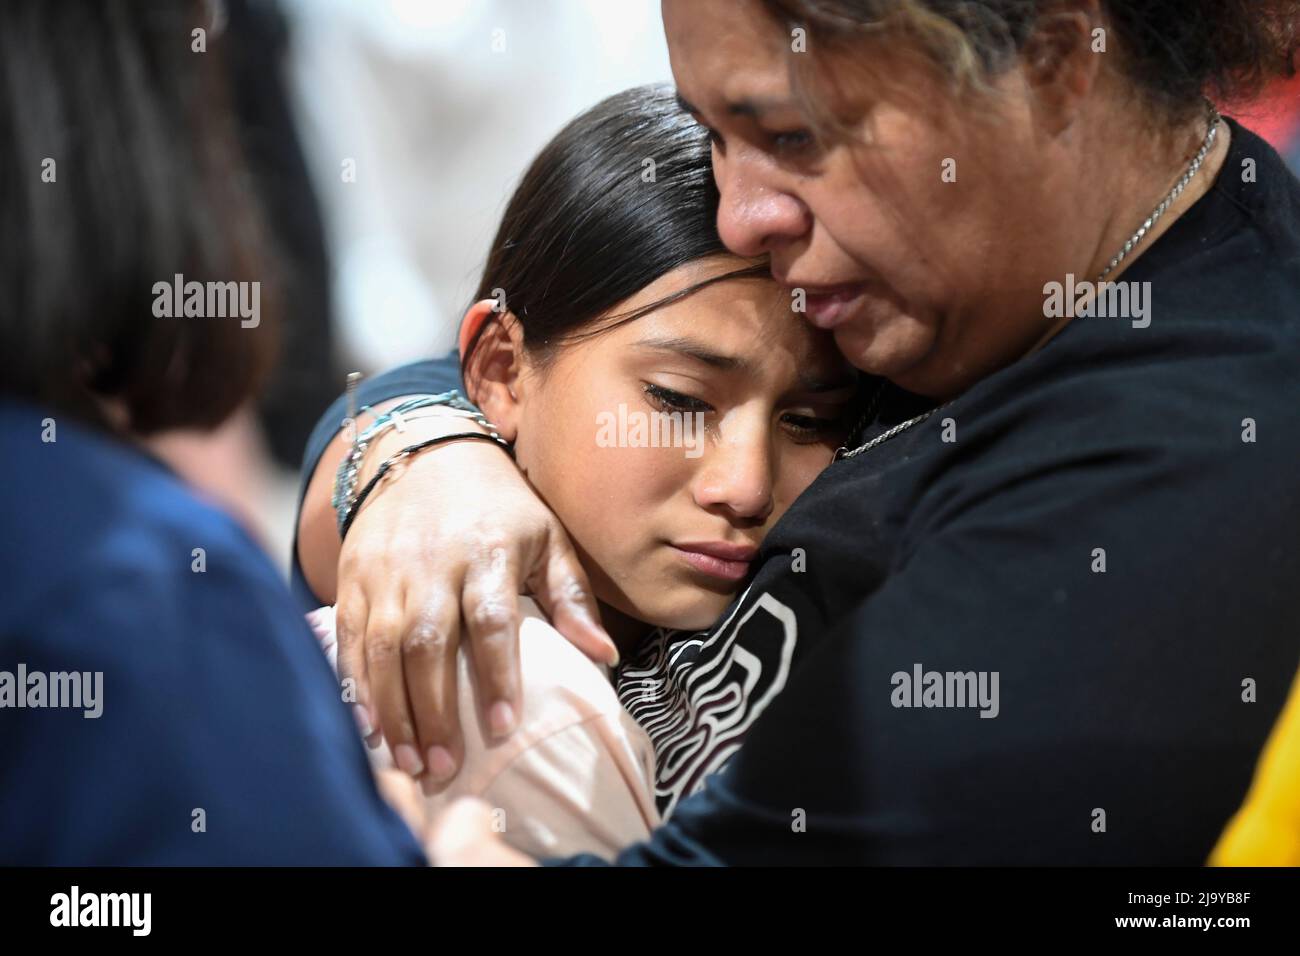 Uvalde, TX, USA. 25th May, 2022. A Uvalde fourth grade teacher who asked not to be identified hugs one of her students at a community healing service held at the Uvalde County fairgrounds on Wednesday, May 25, 2022. The event follows a mass shooting at Uvalde's Robb Elementary School that killed 19 students and two teachers on Tuesday. (Credit Image: © Bob Daemmrich/ZUMA Press Wire) Stock Photo